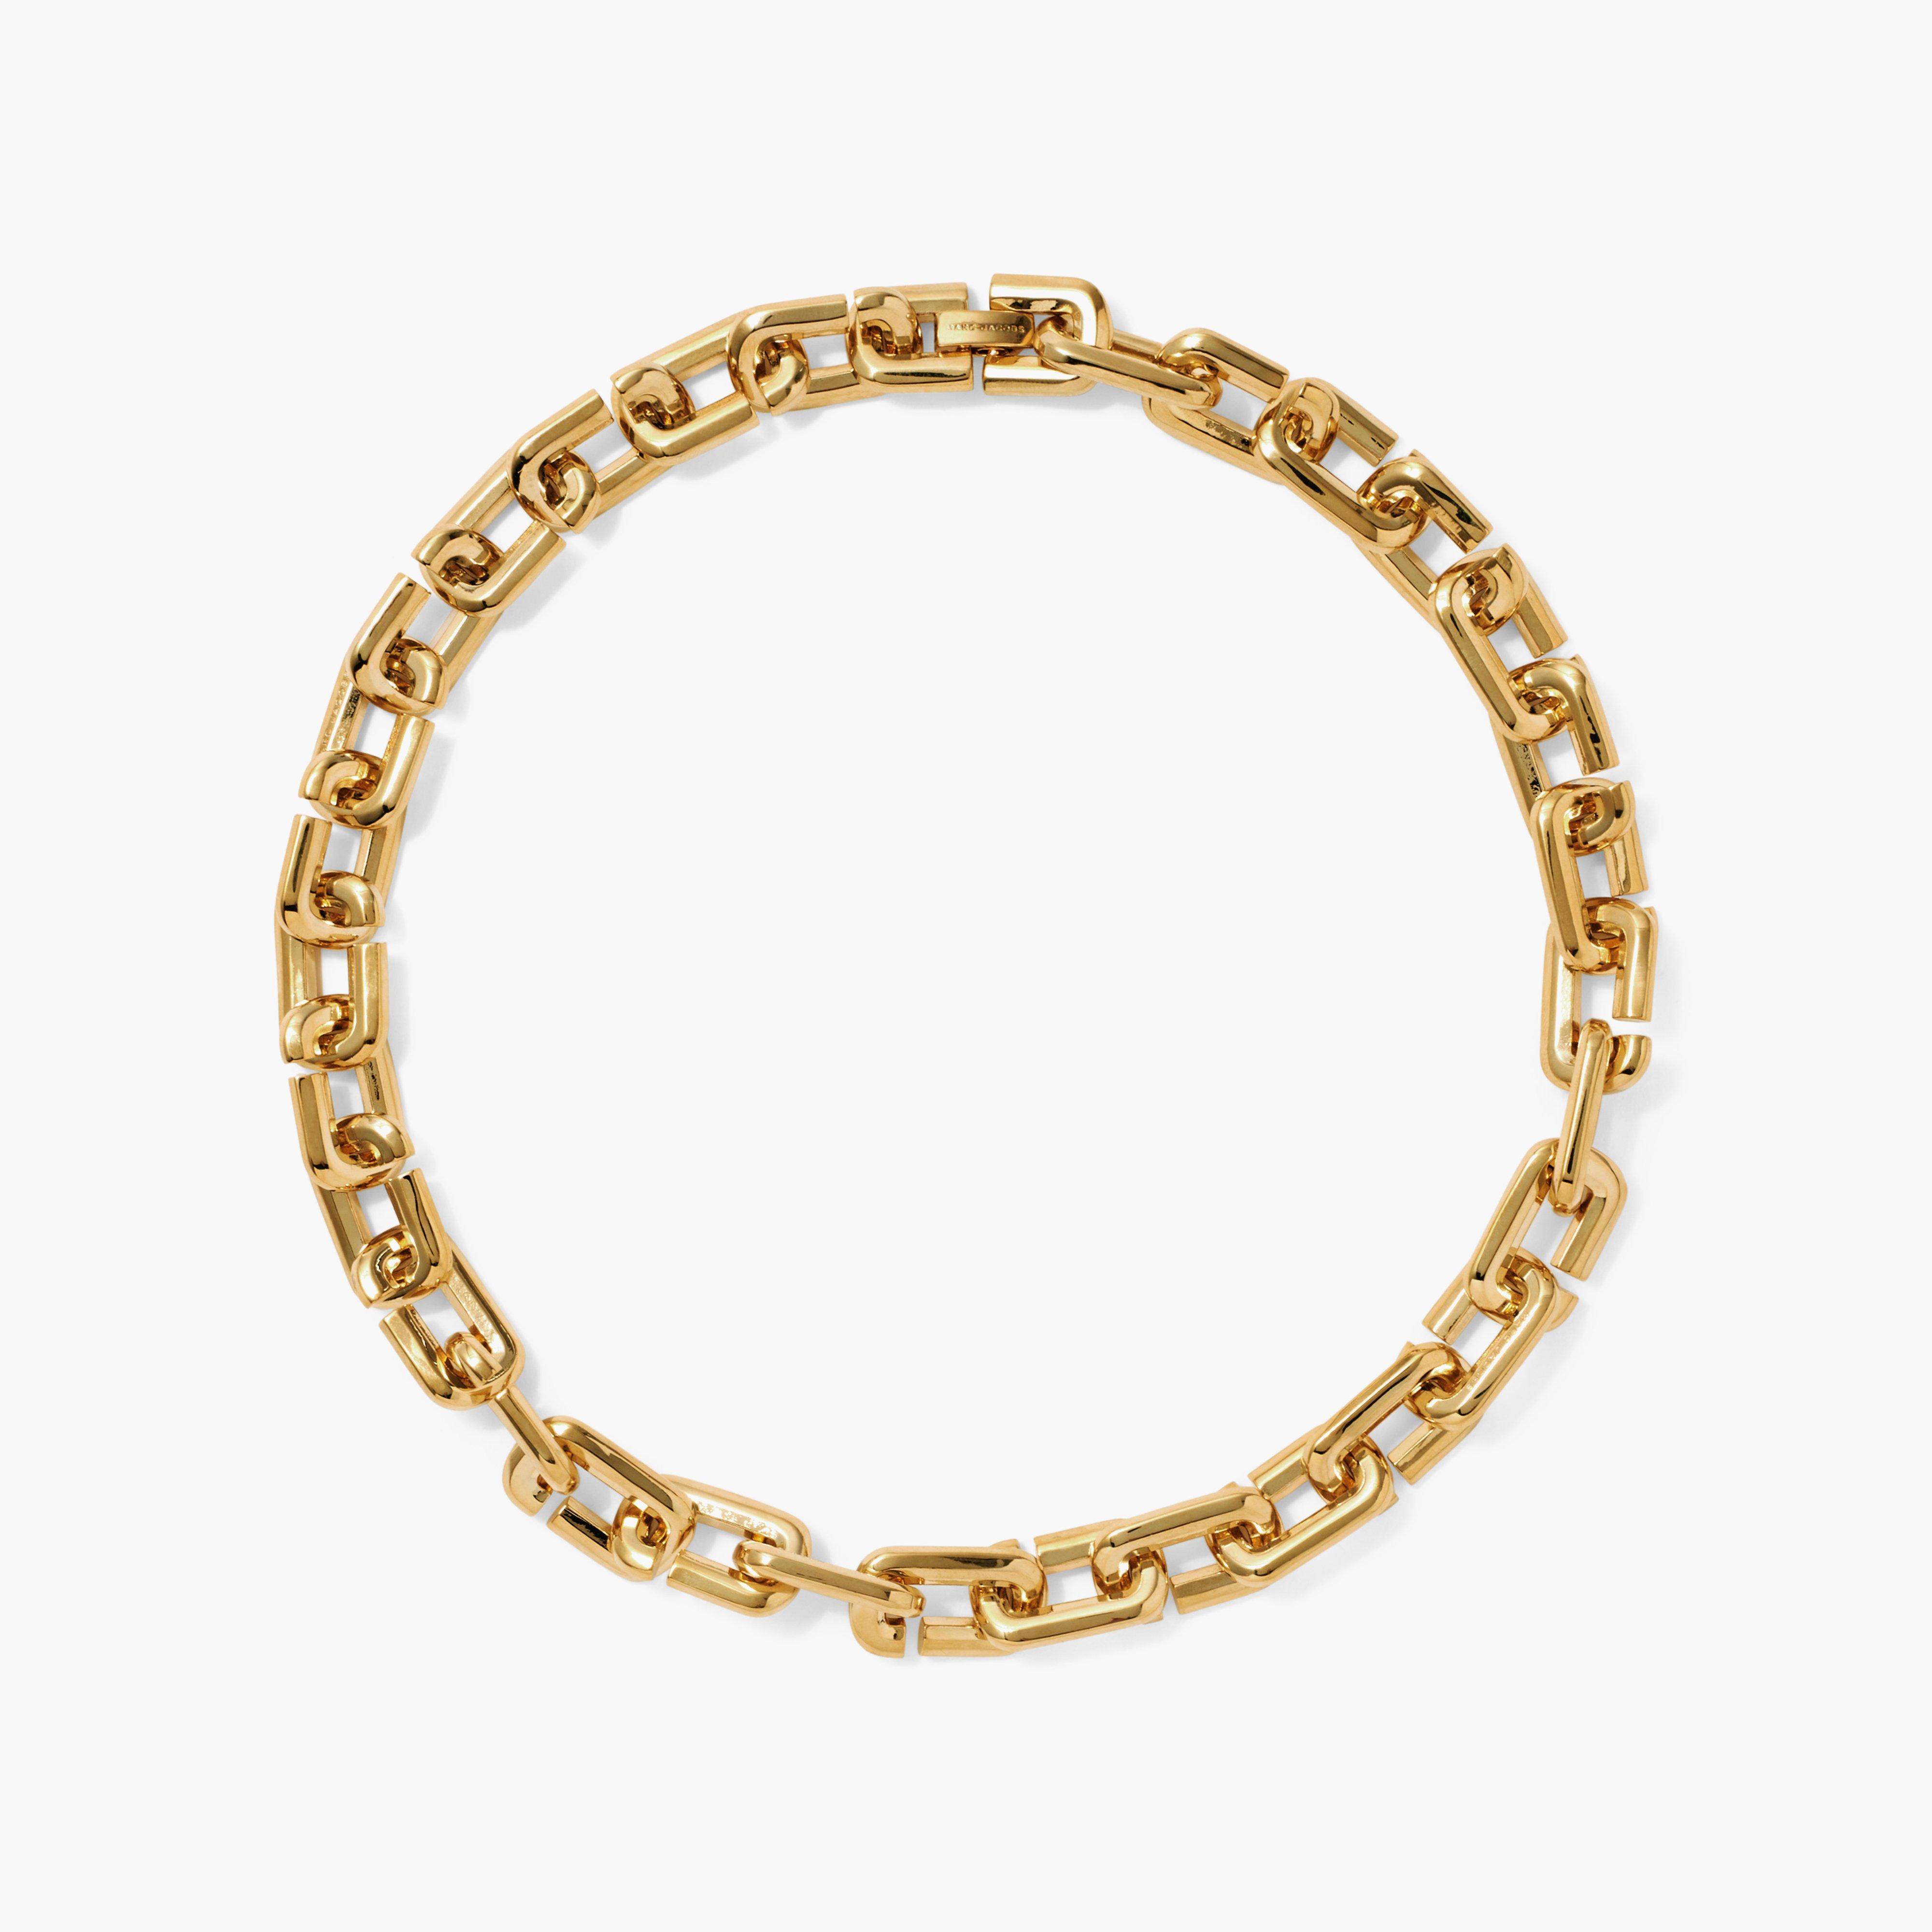 Marc by Marc jacobs The J Marc Chain Link Necklace,GOLD